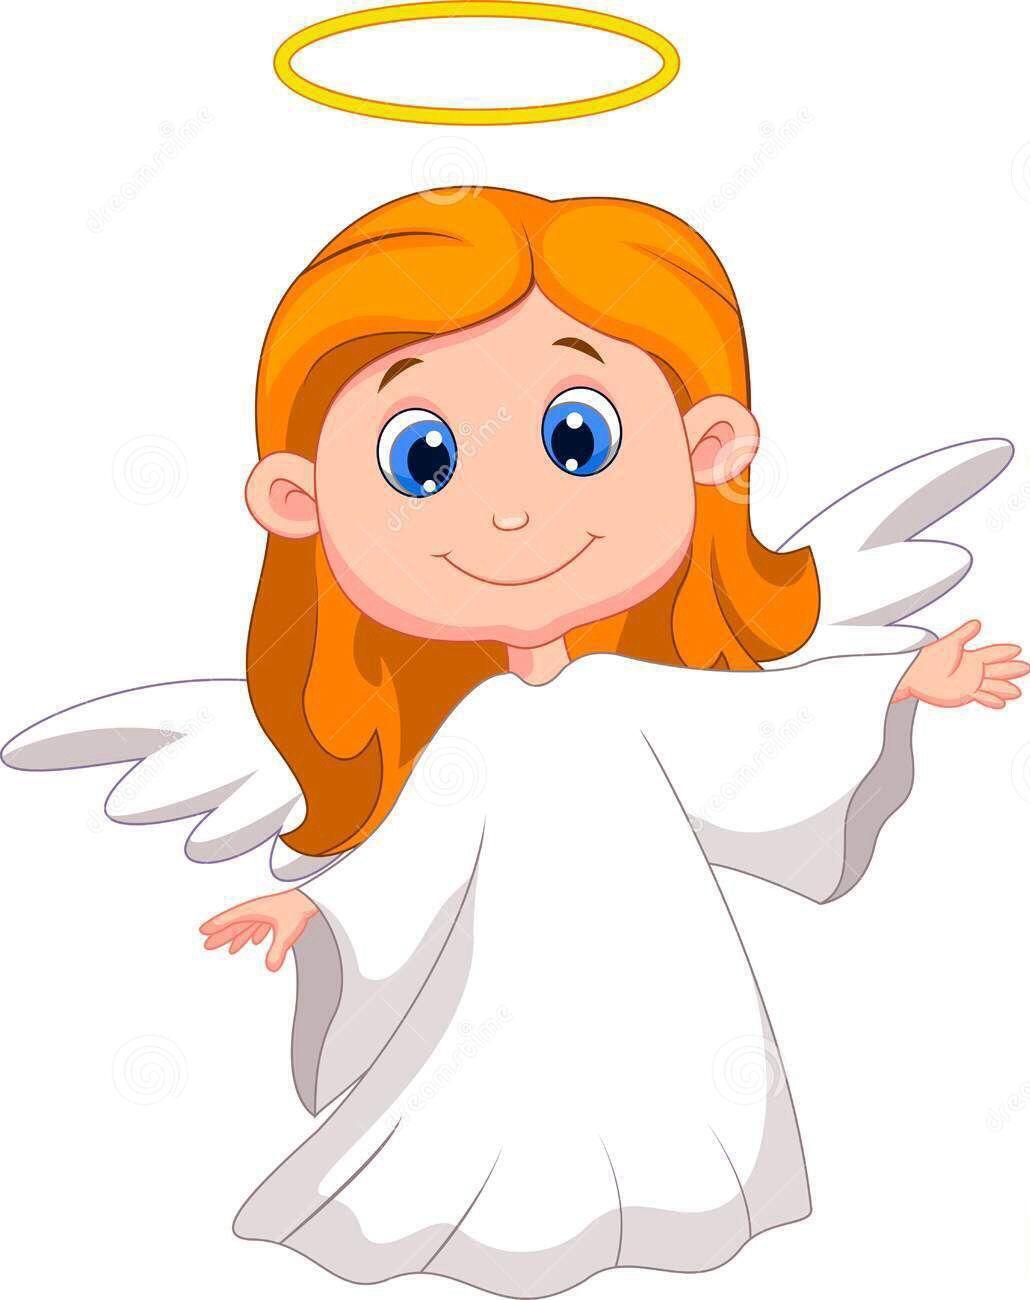 Angel clipart group.